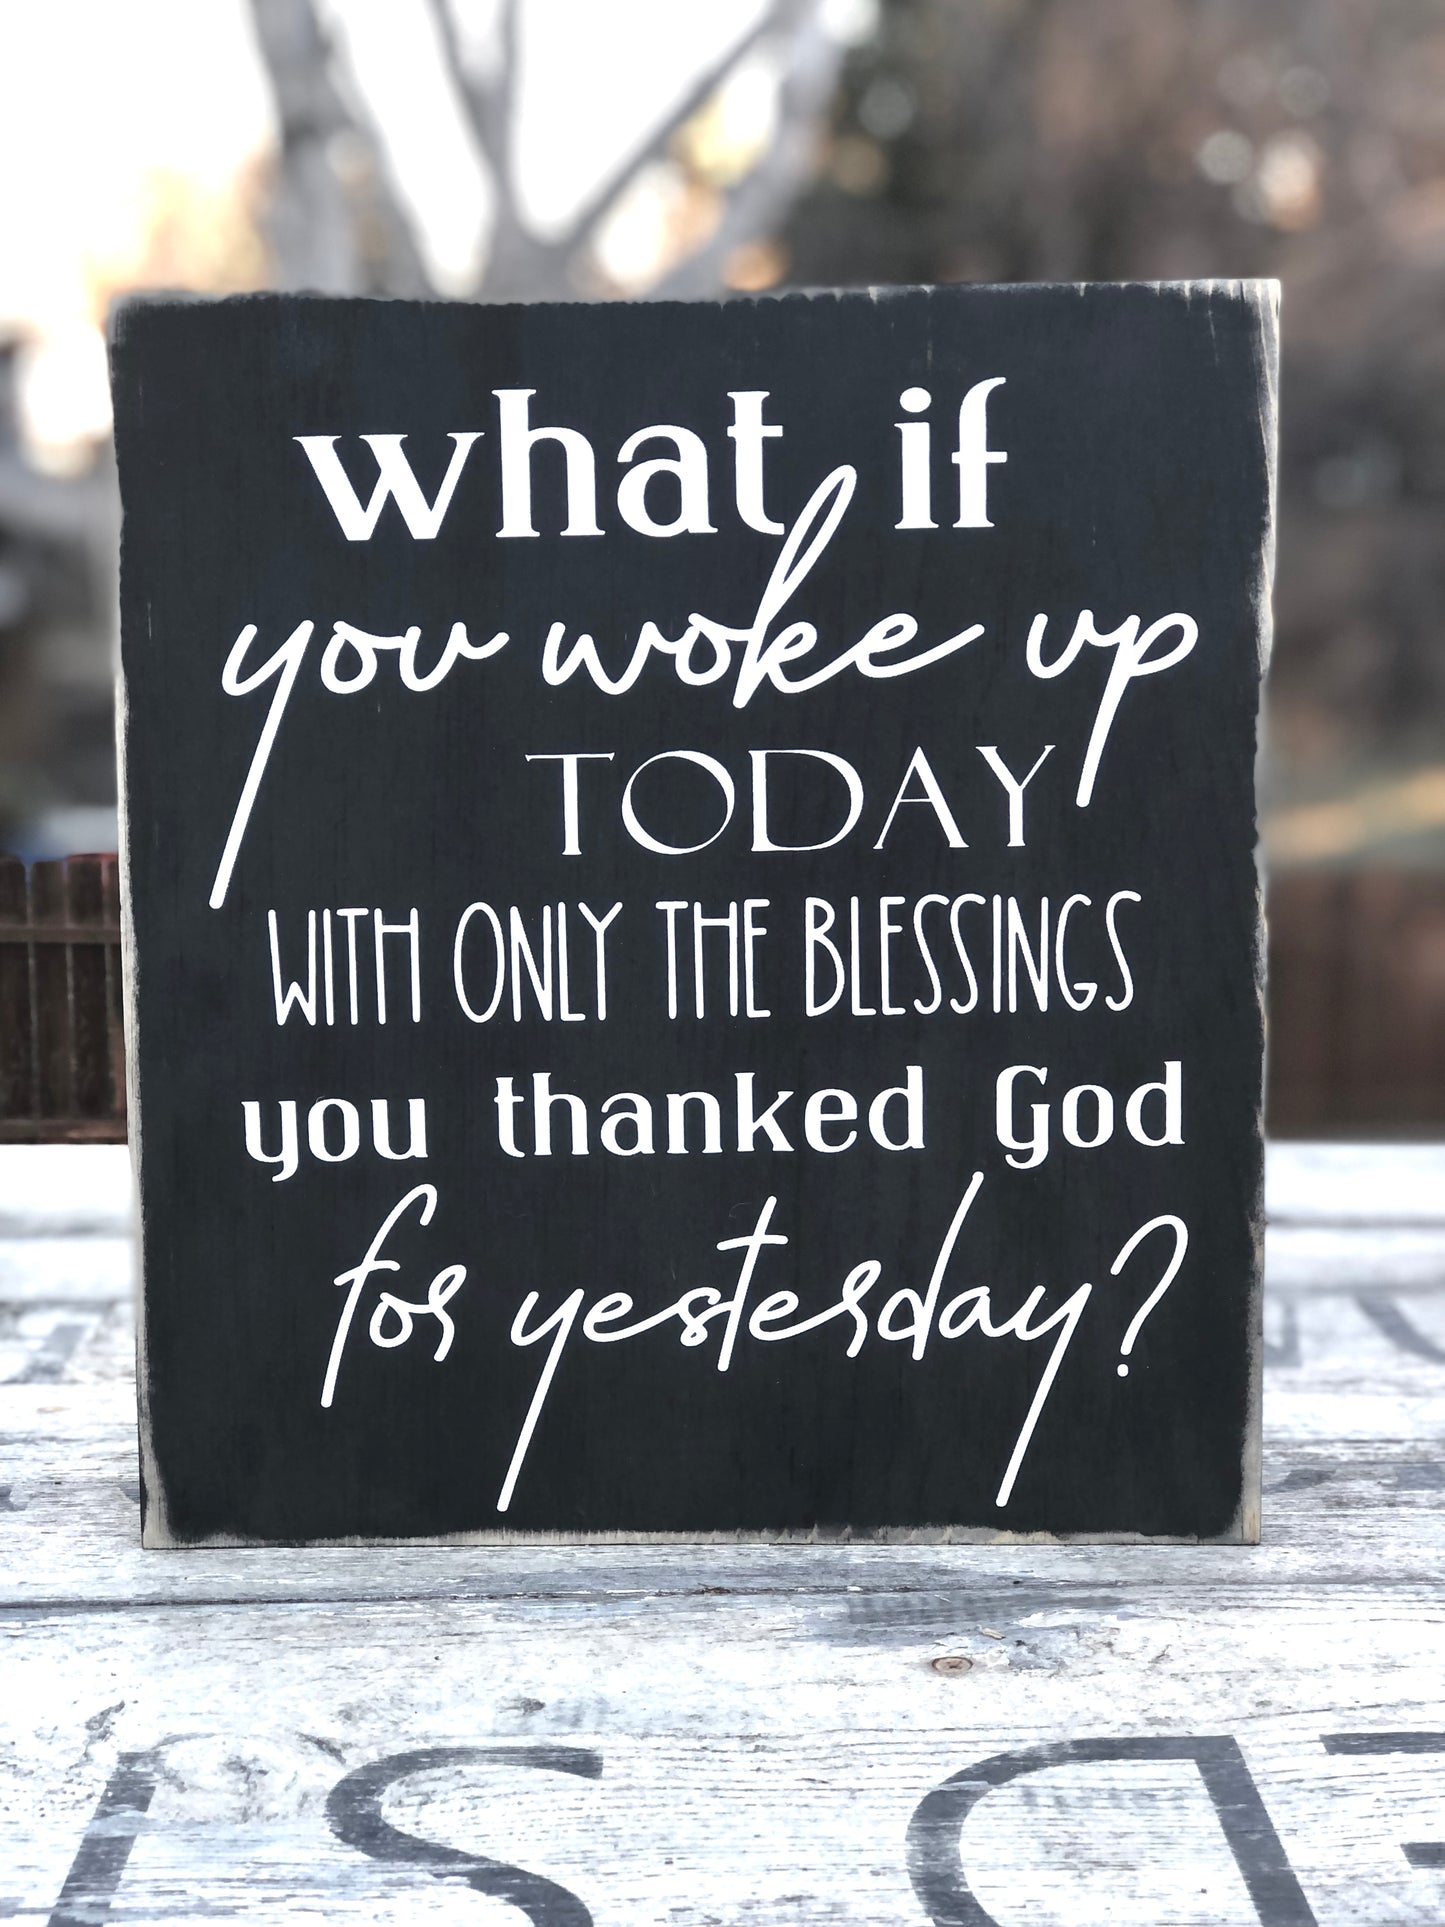 WHAT IF YOU WOKE UP TODAY WITH ONLY THE BLESSINGS YOU THANKED GOD FOR YESTERDAY  - WOOD SIGN